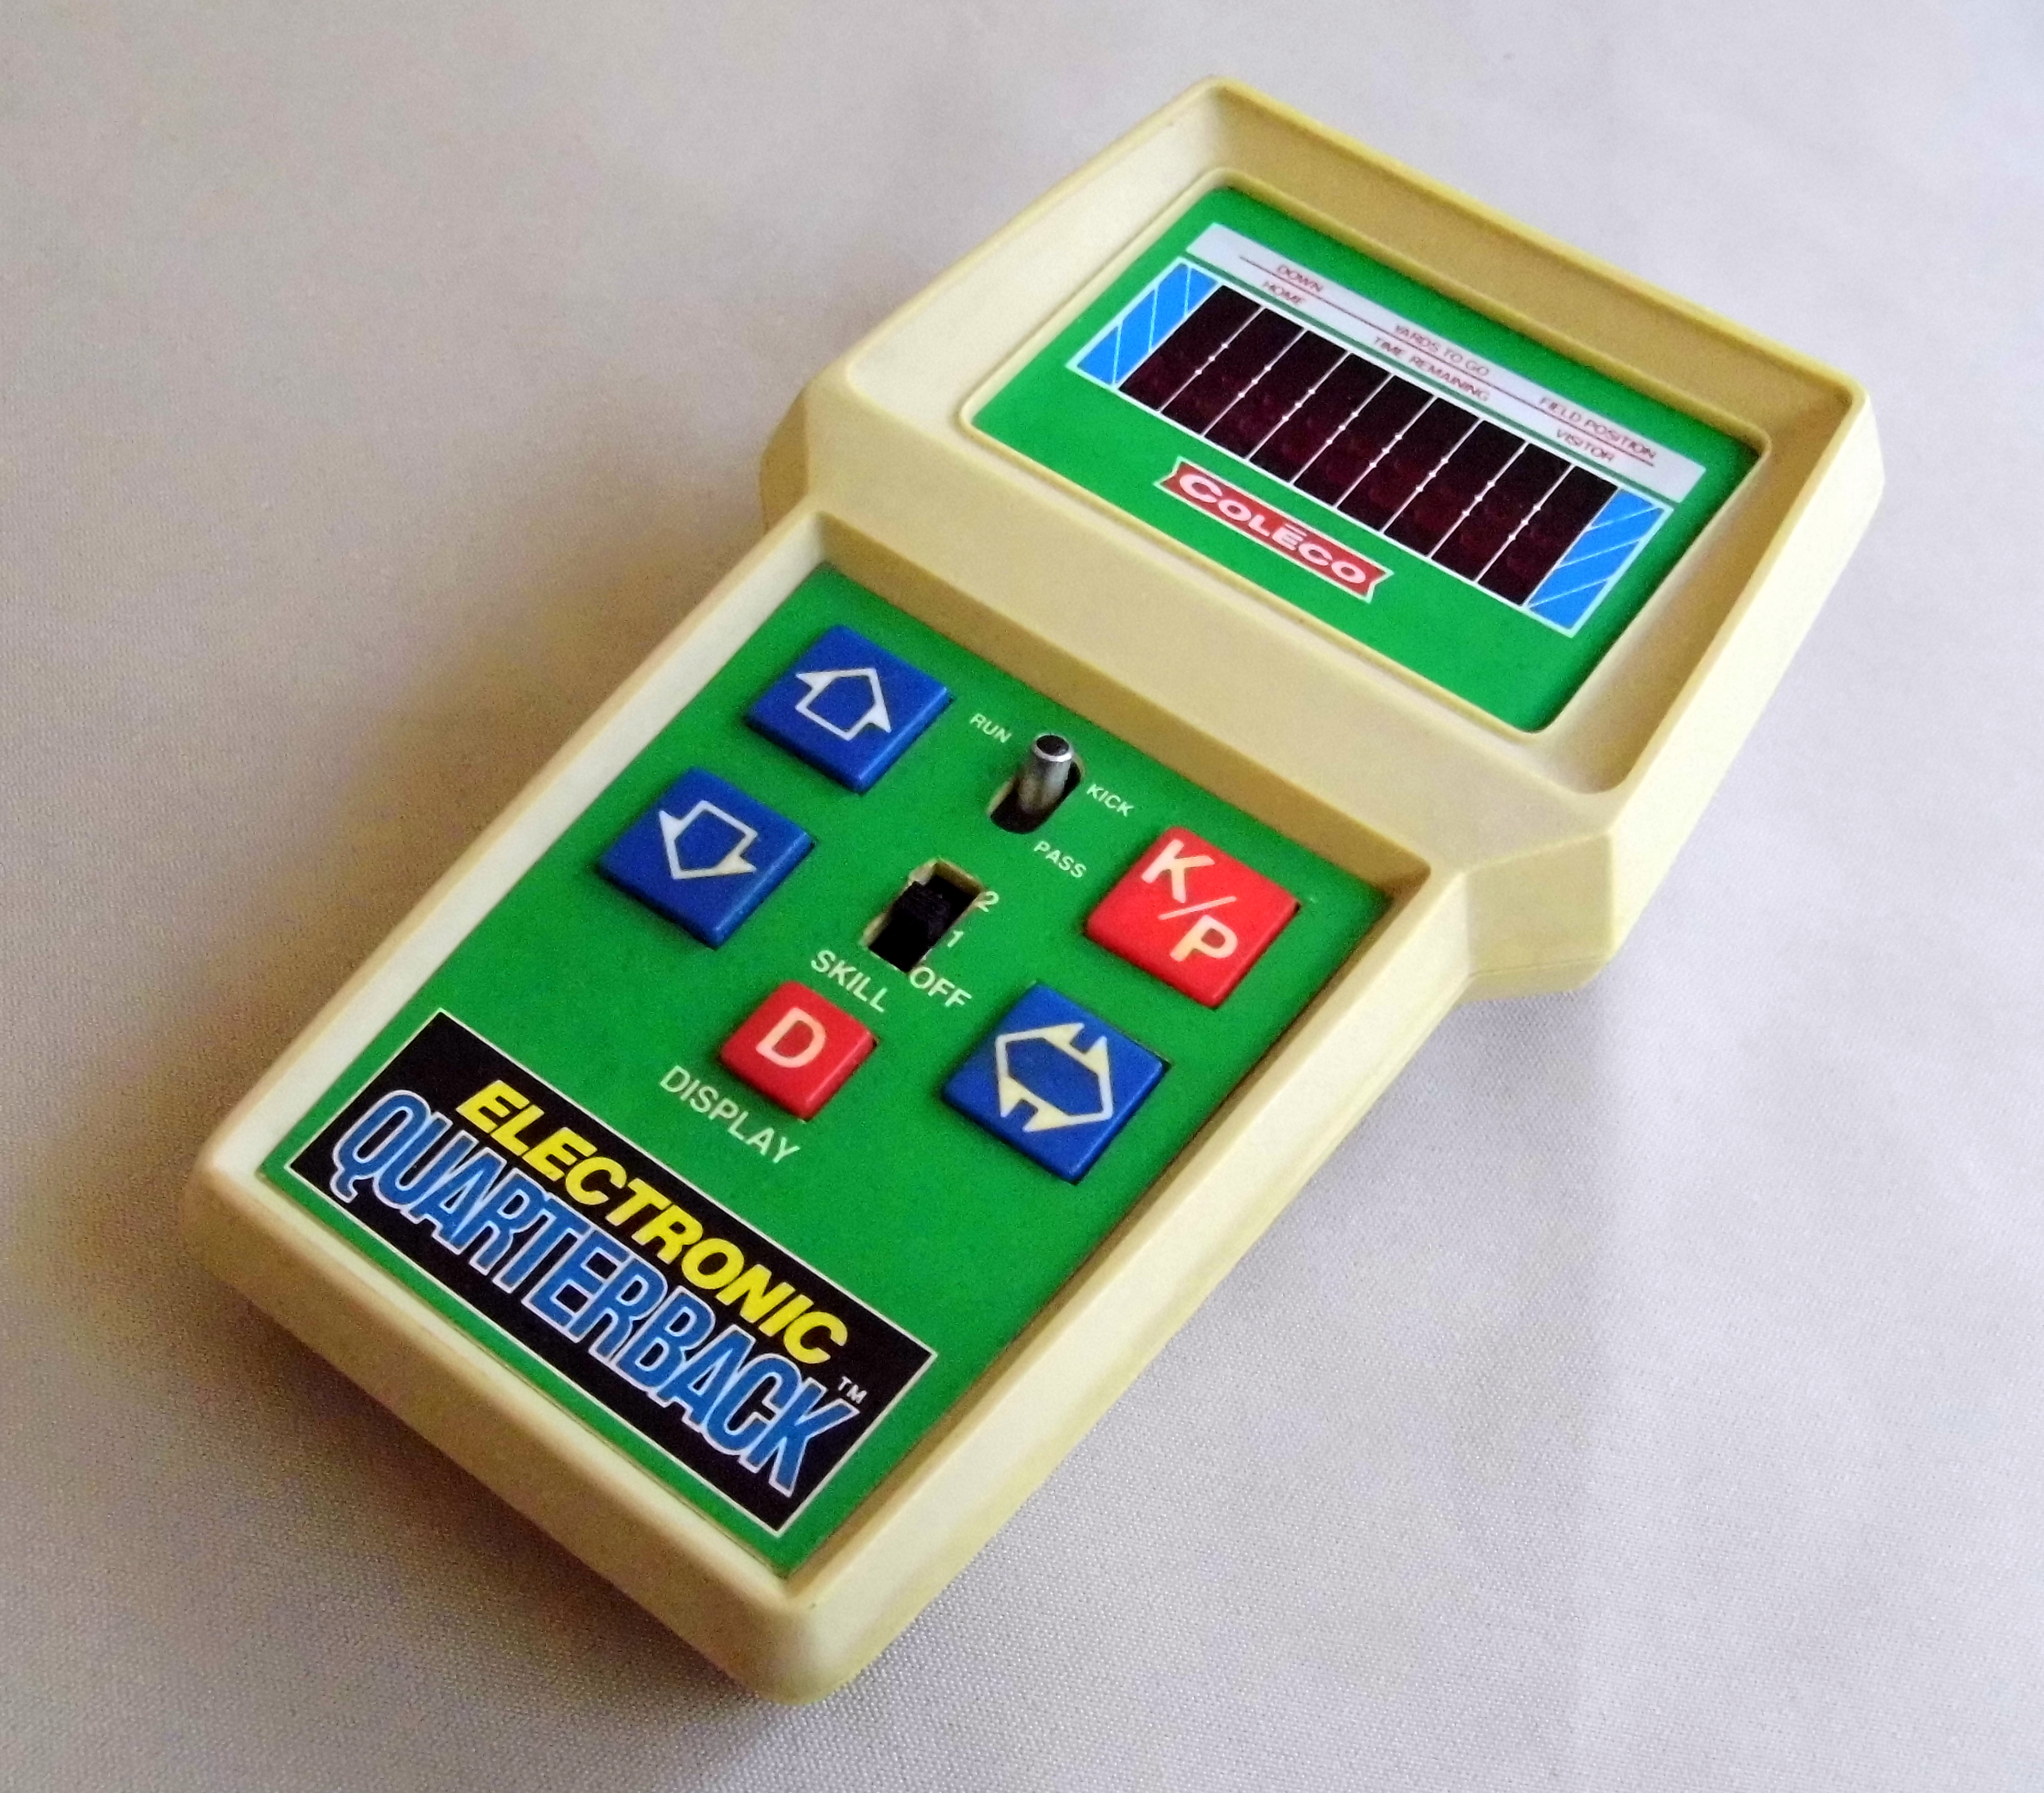 [Imagen: Coleco_Electronic_Quarterback,_Made_in_H..._Game).jpg]